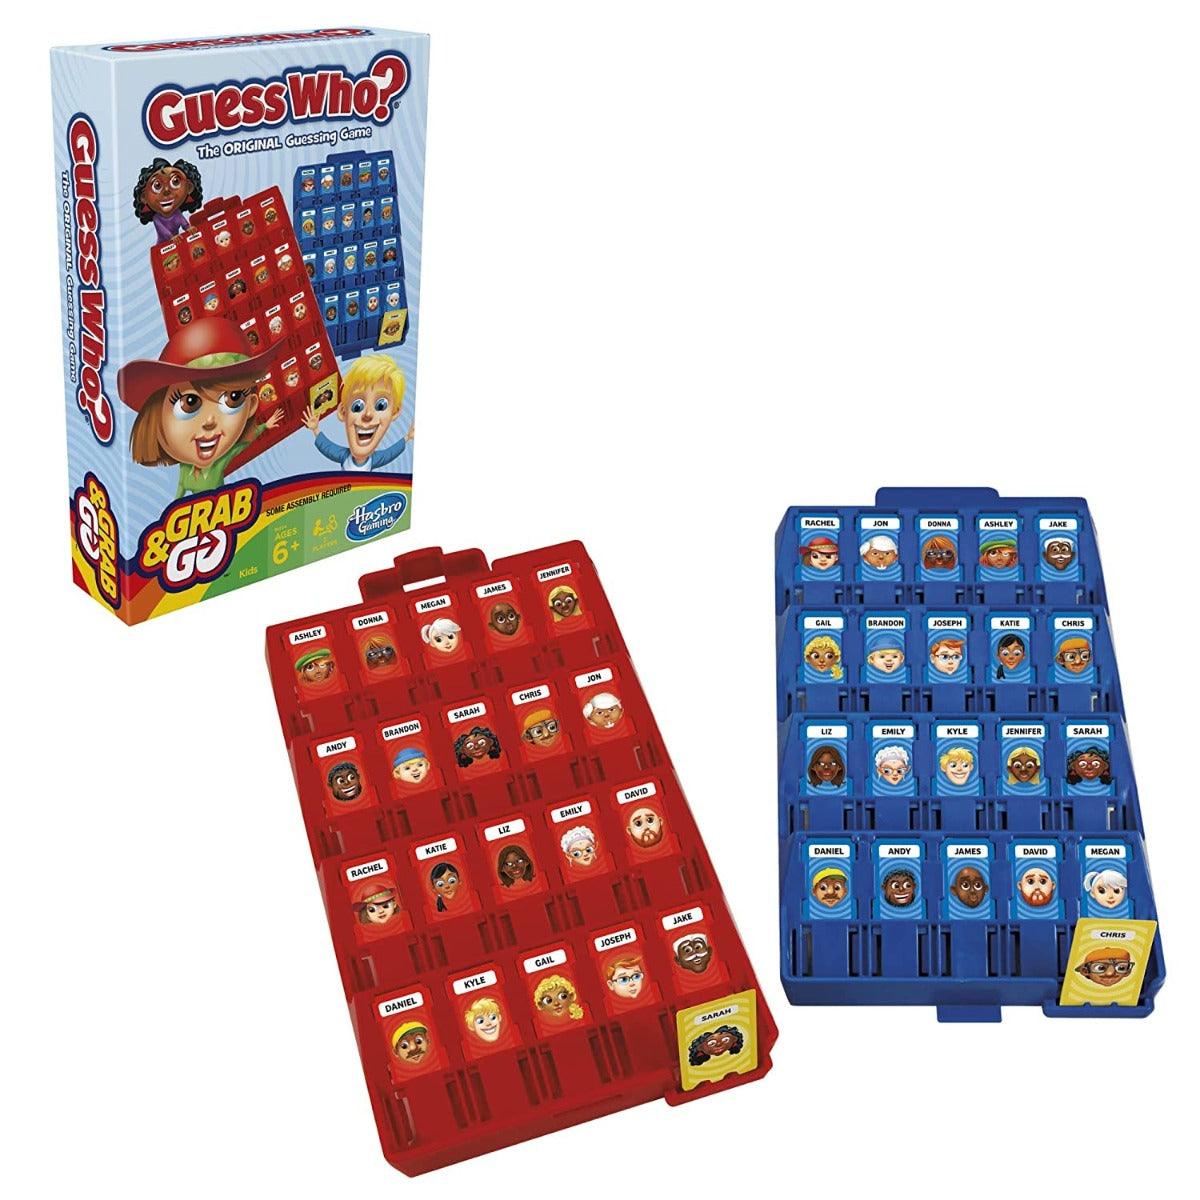 Hasbro Gaming Guess Who? Grab and Go Game - Portable 2 Player Original Guessing Game for Kids Ages 6 and Up